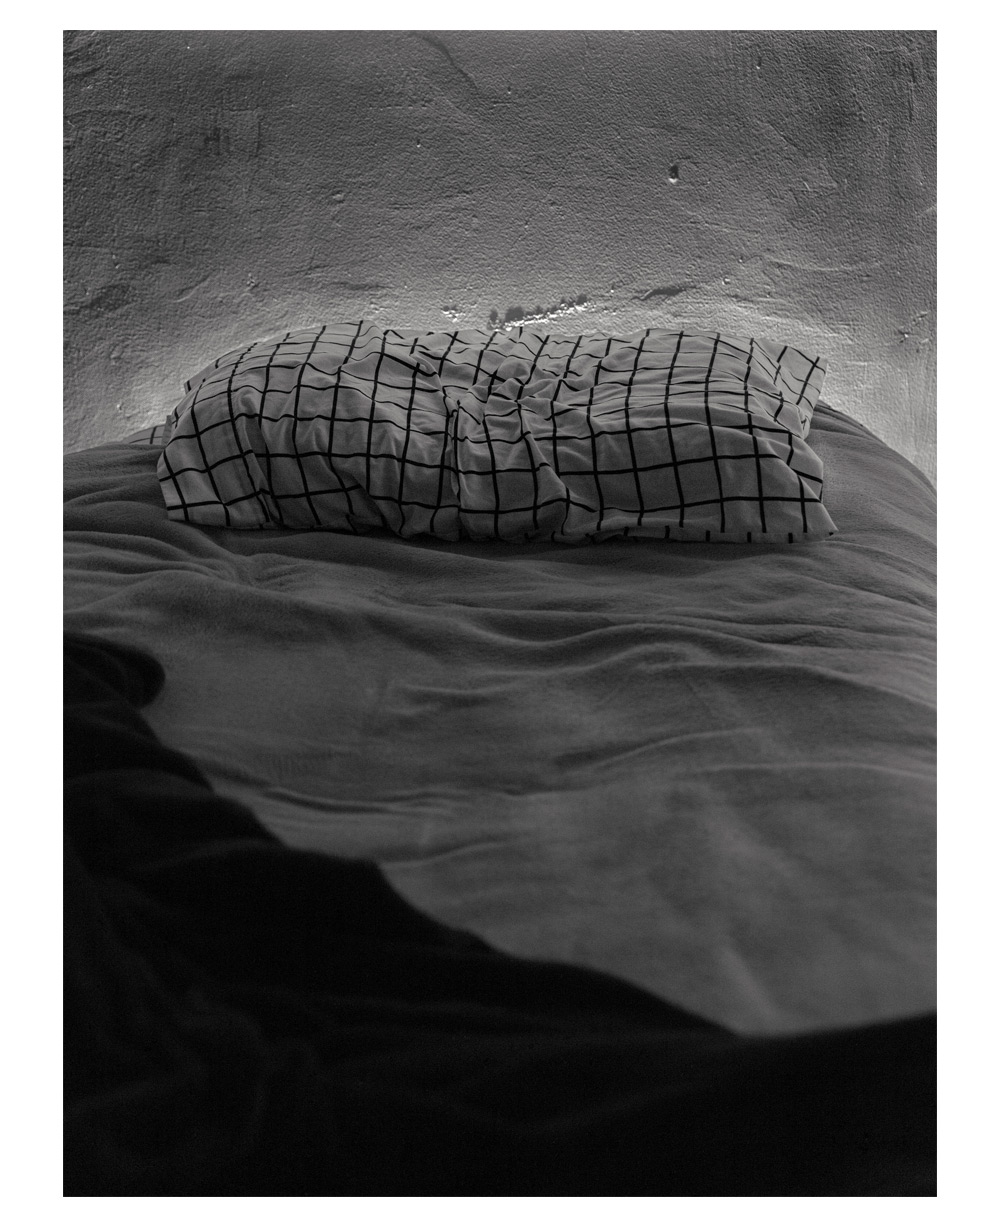 A photograph of an unmade single bed. The photograph is in black and white, and the bedsheets are gray. The pillow in the center of the photograph is white with black checkers. The bed is against a white/gray wall.